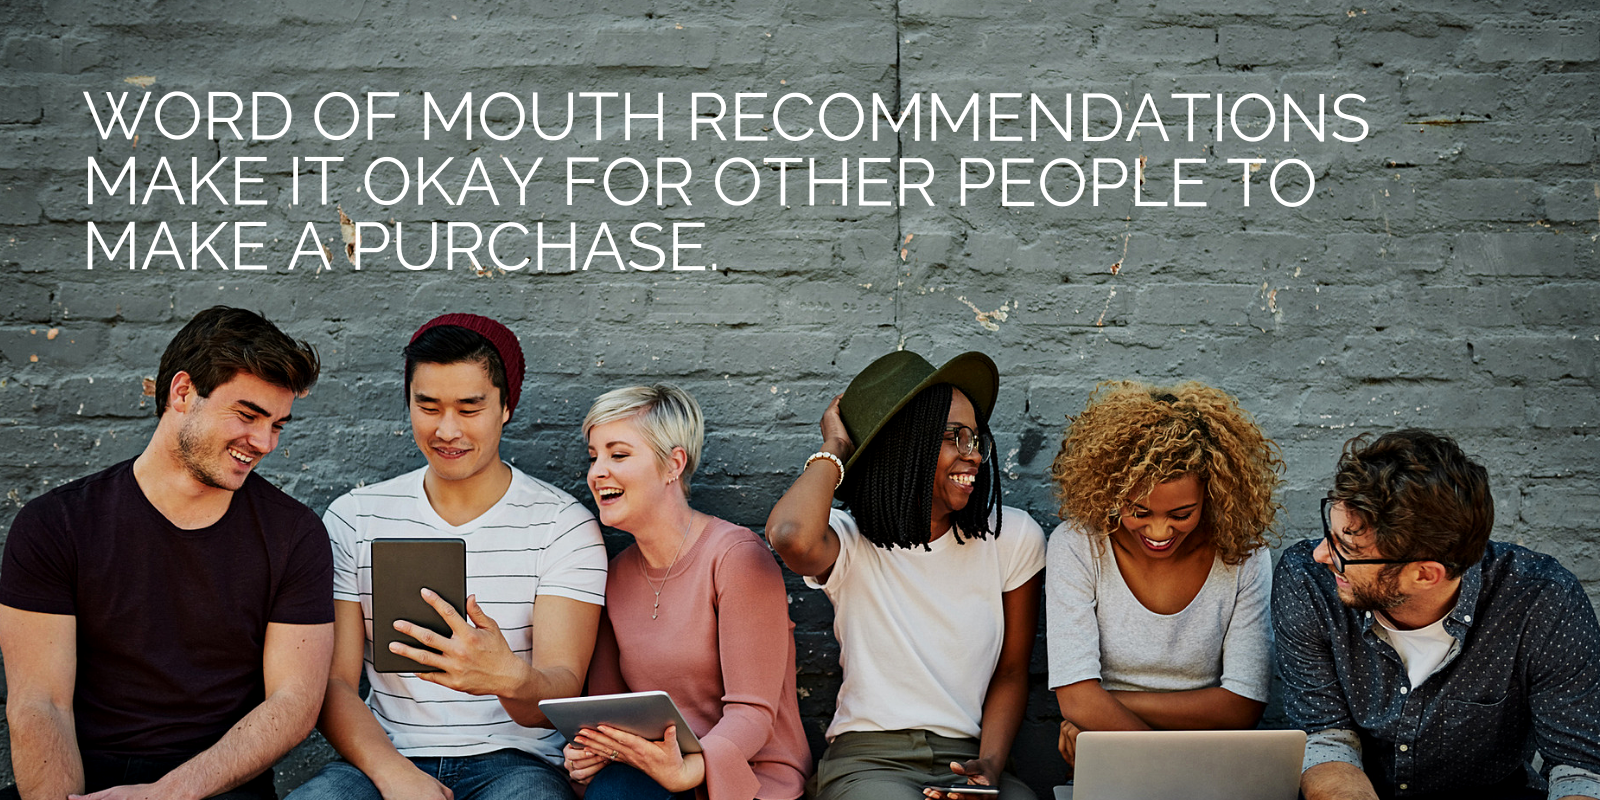 Word of Mouth Recommendations Make It Okay for Other People to Make a Purchase